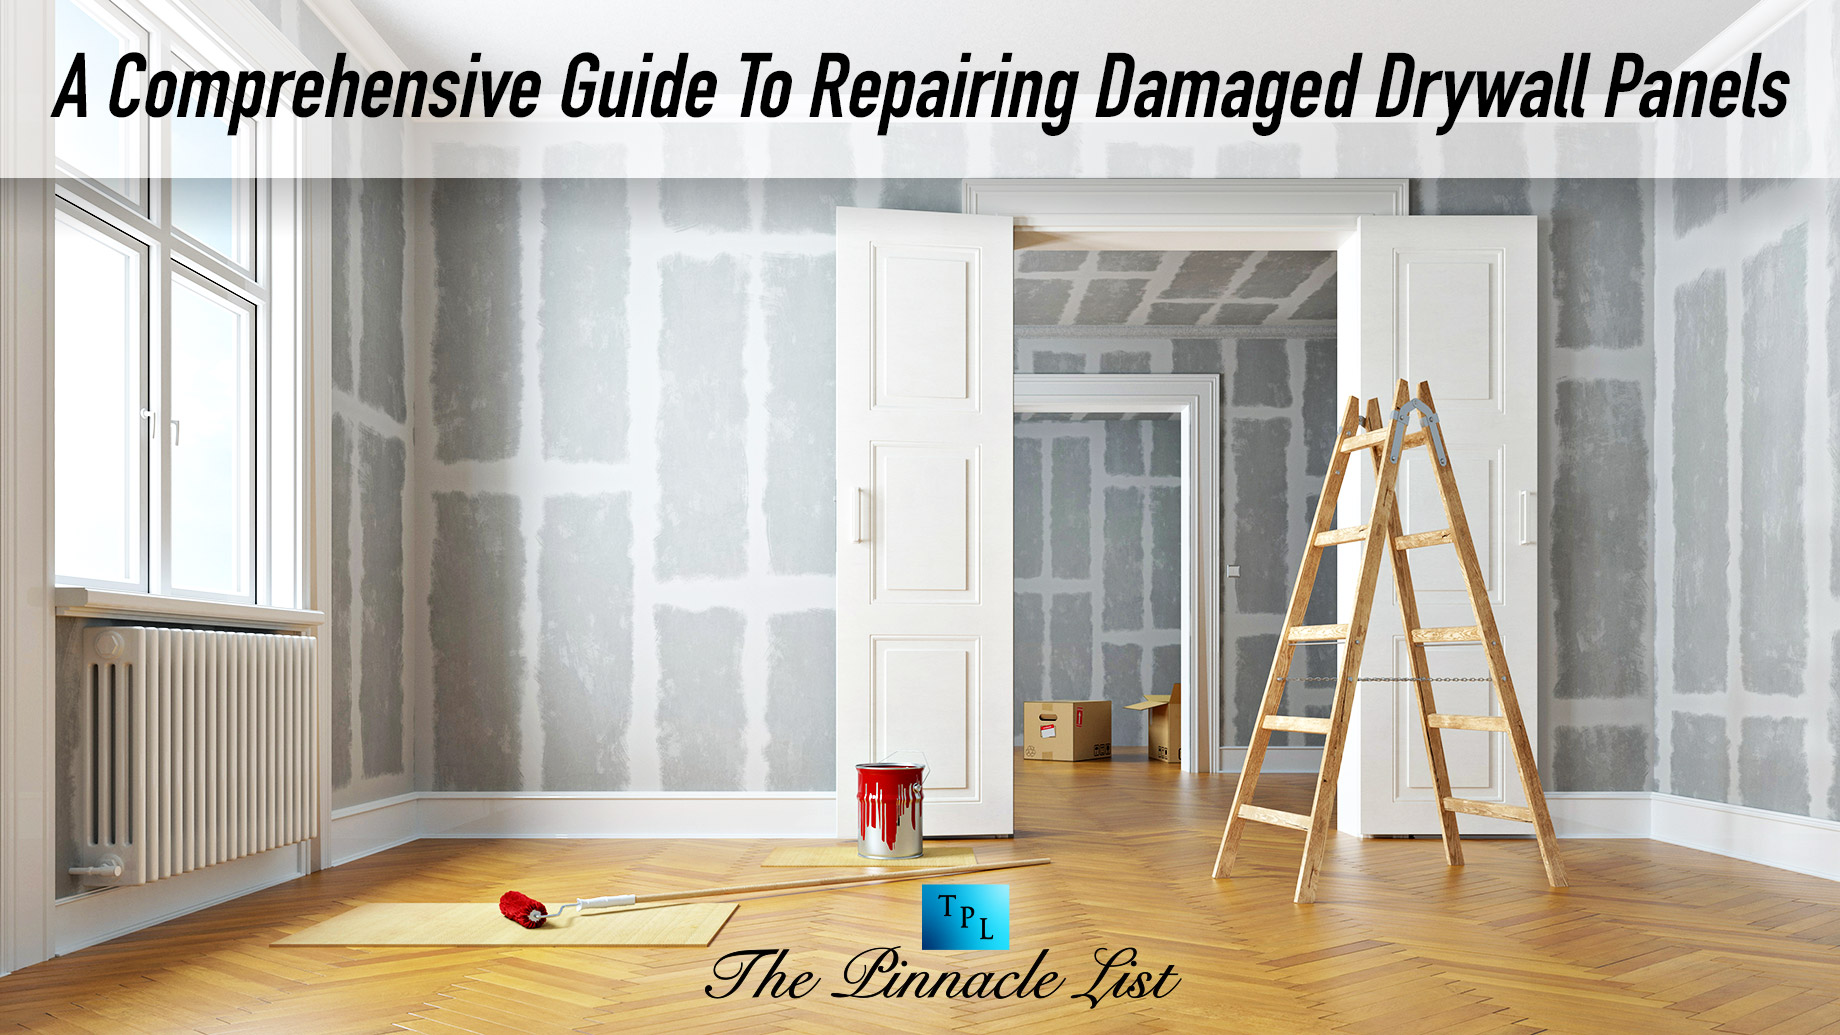 A Comprehensive Guide To Repairing Damaged Drywall Panels